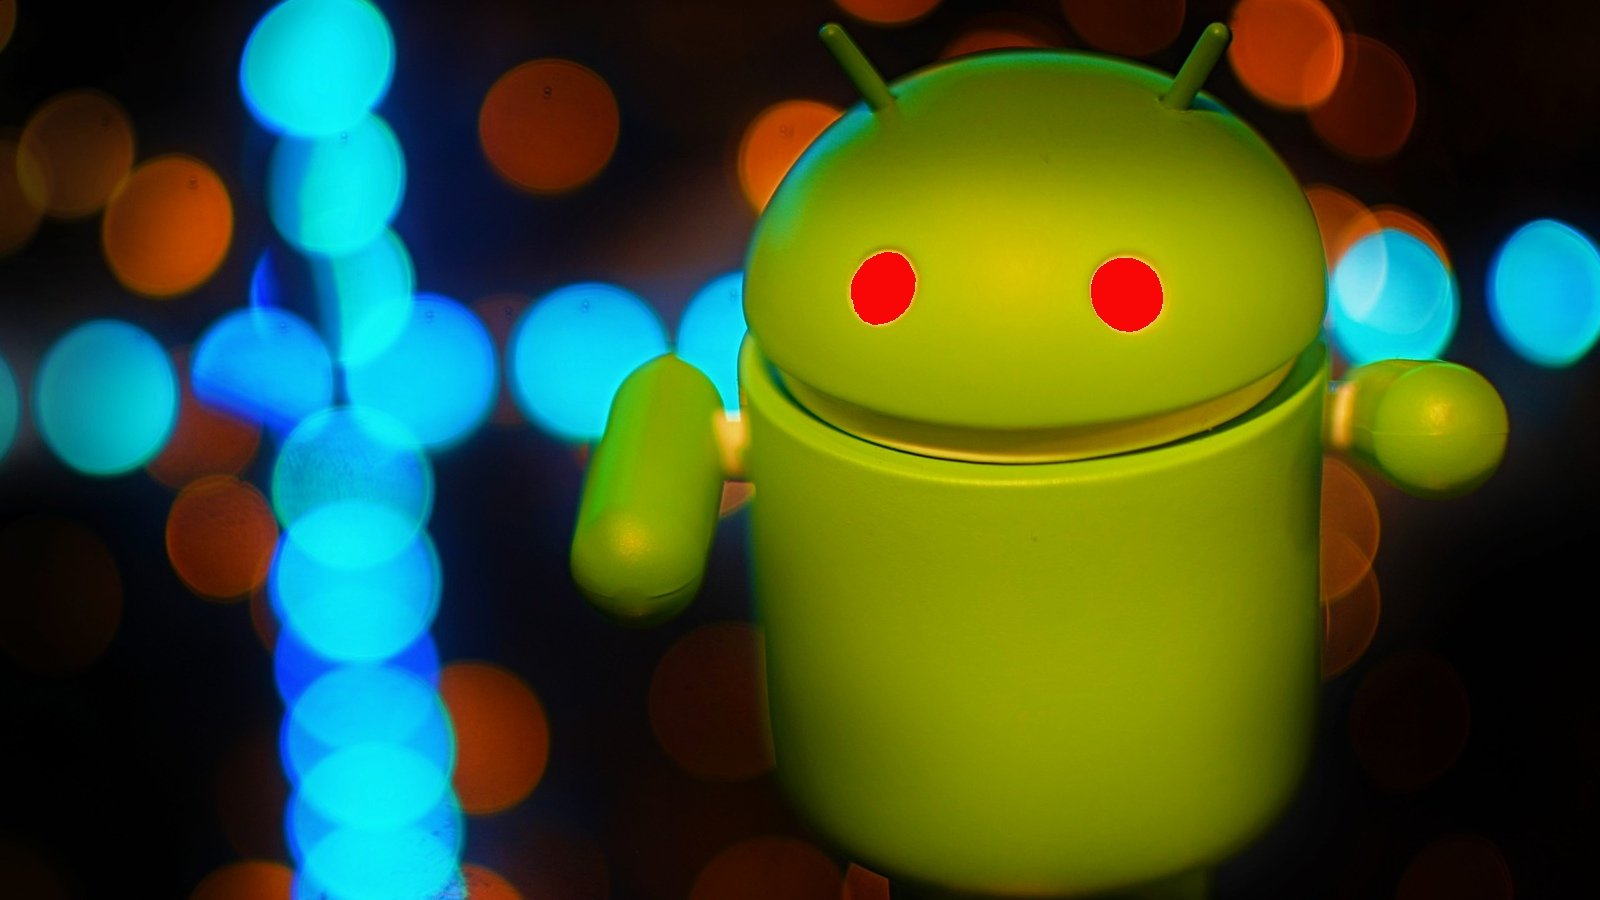 malware-devs-already-bypassed-android-13’s-new-security-feature